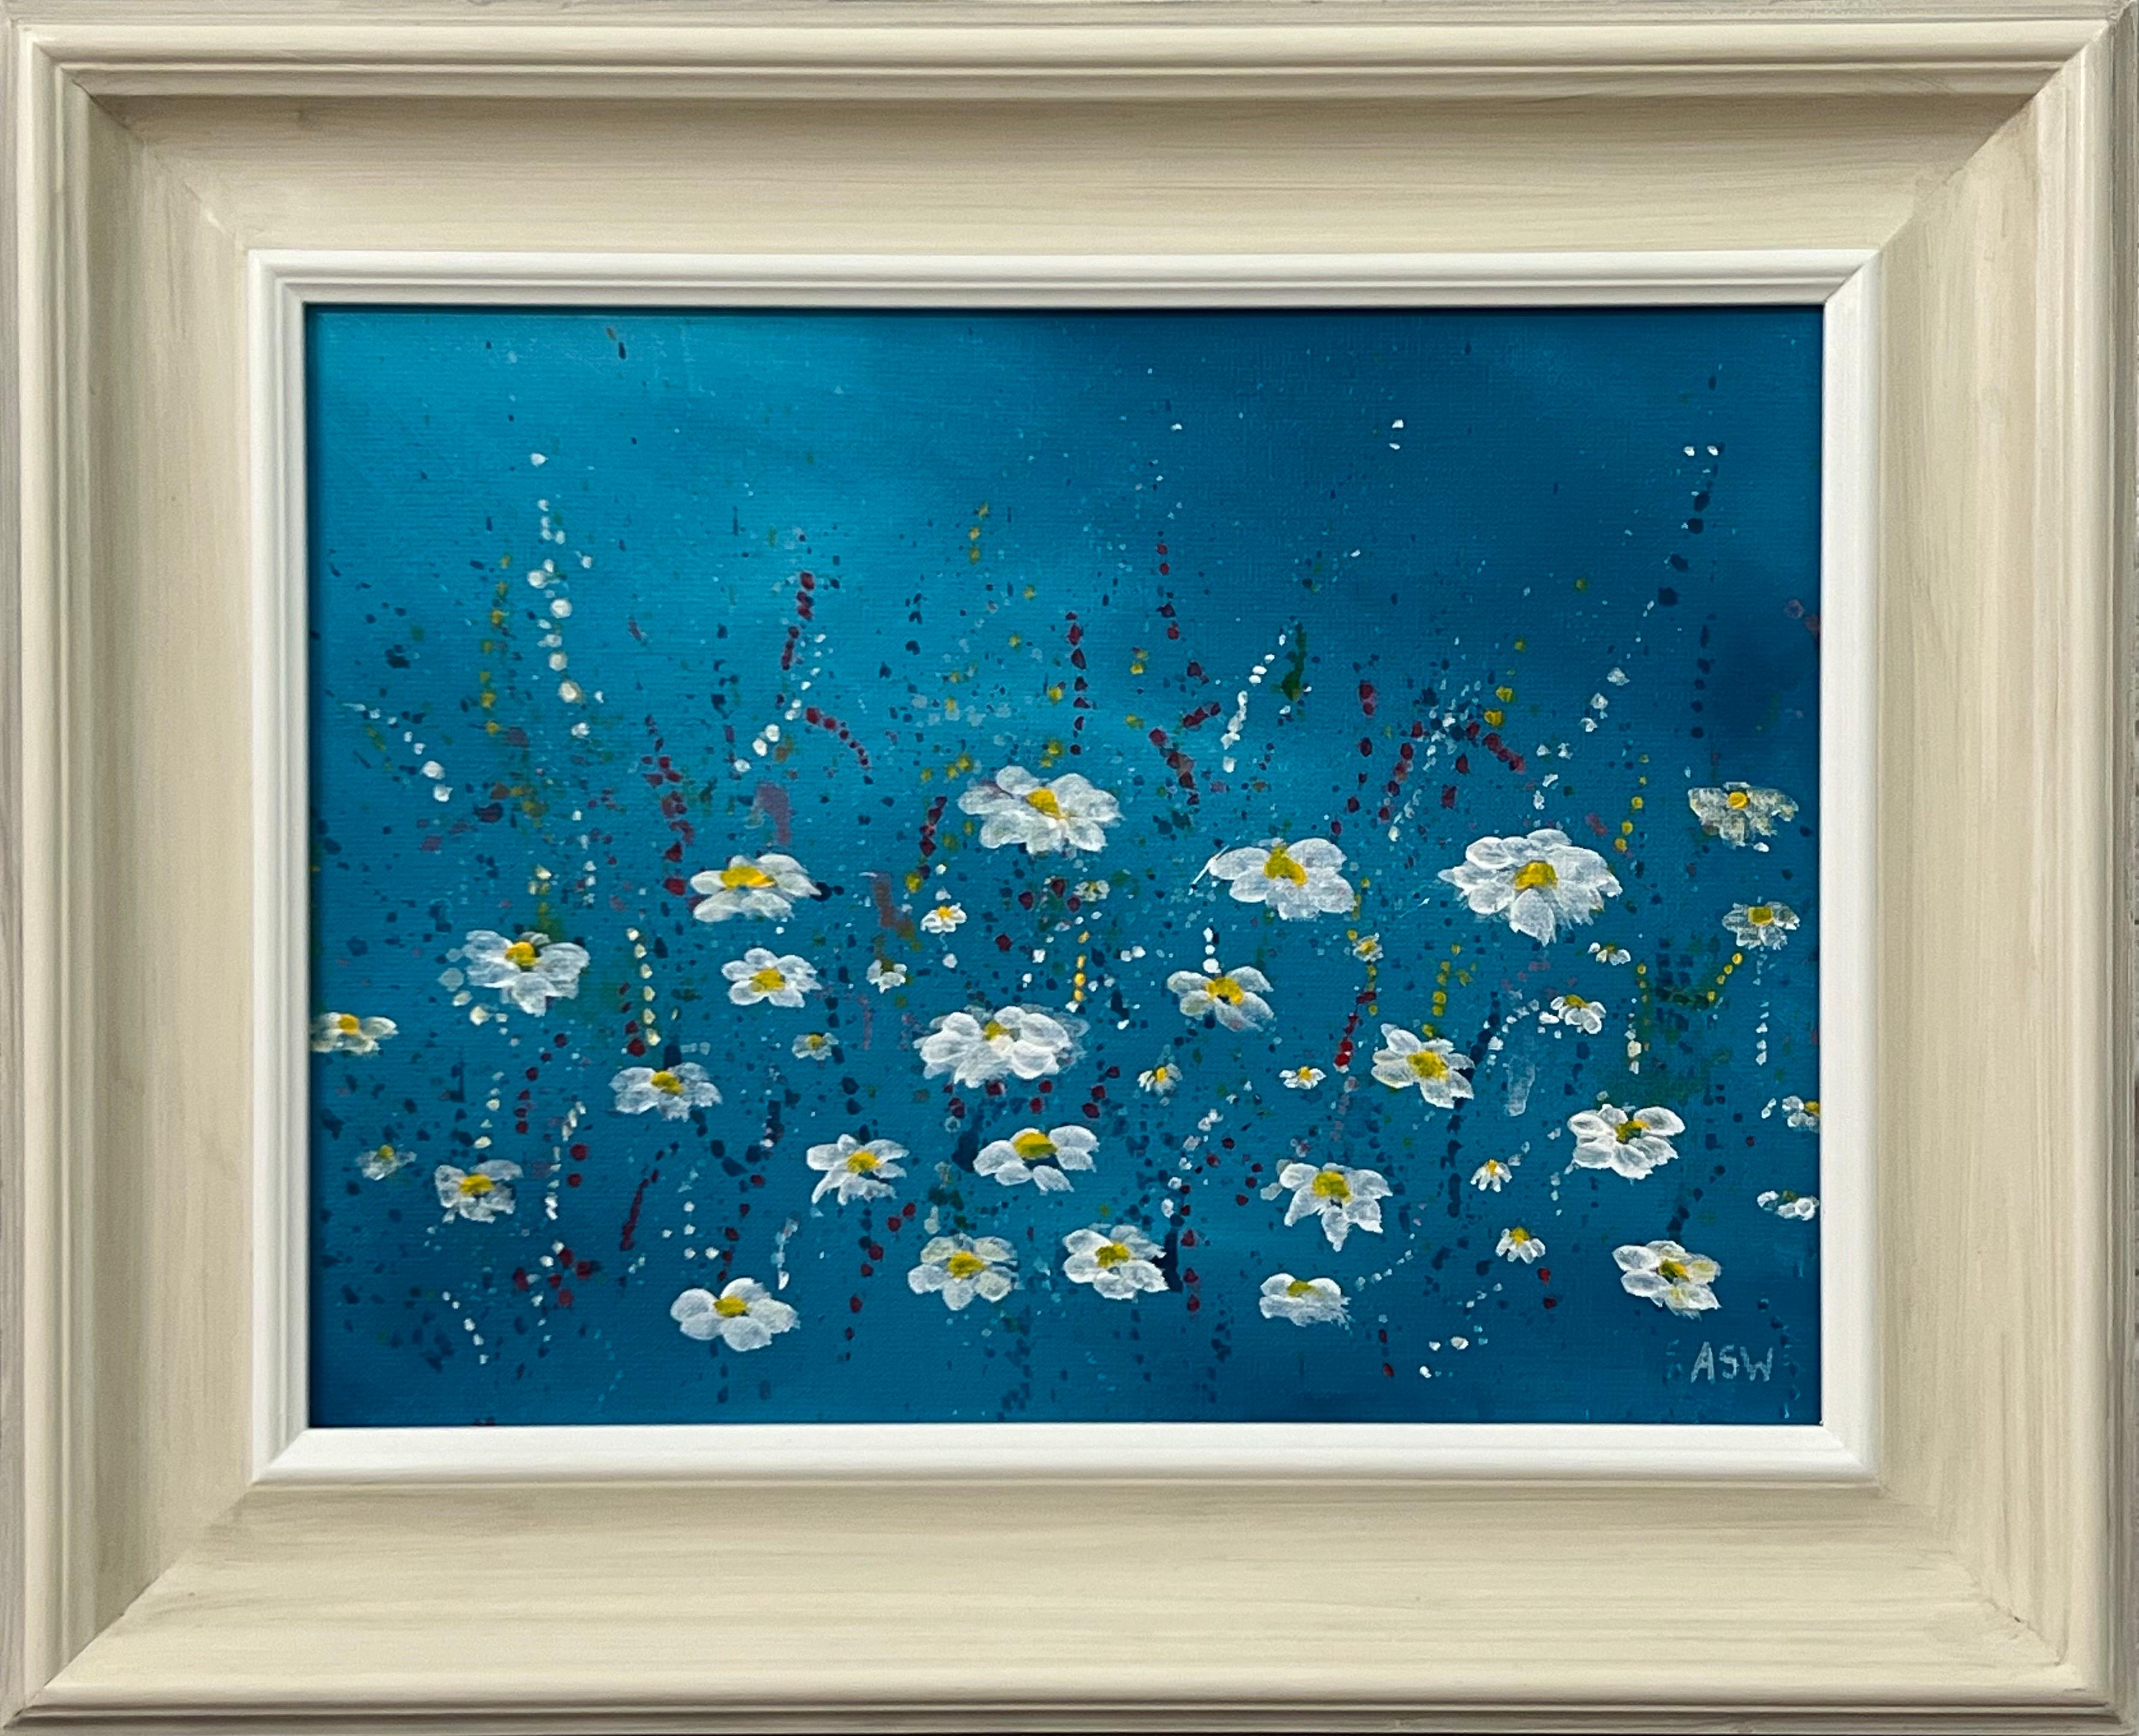 Abstract White Daisy Flowers on Turquoise Background by Contemporary Artist